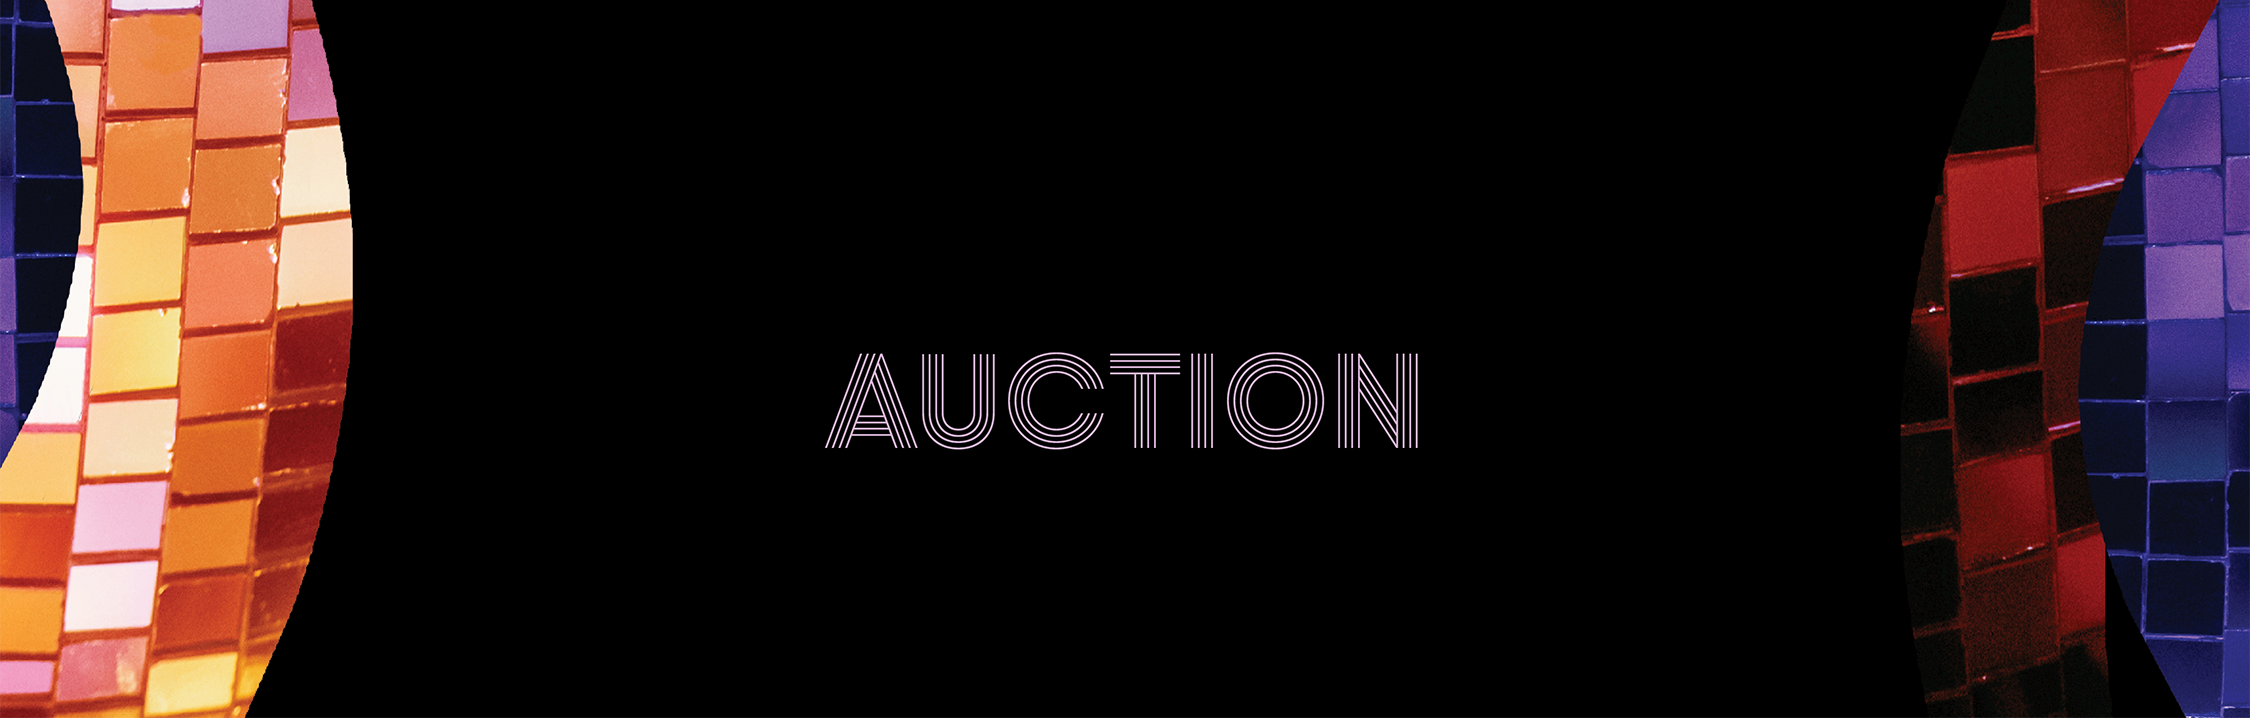 Auction - Banner Image